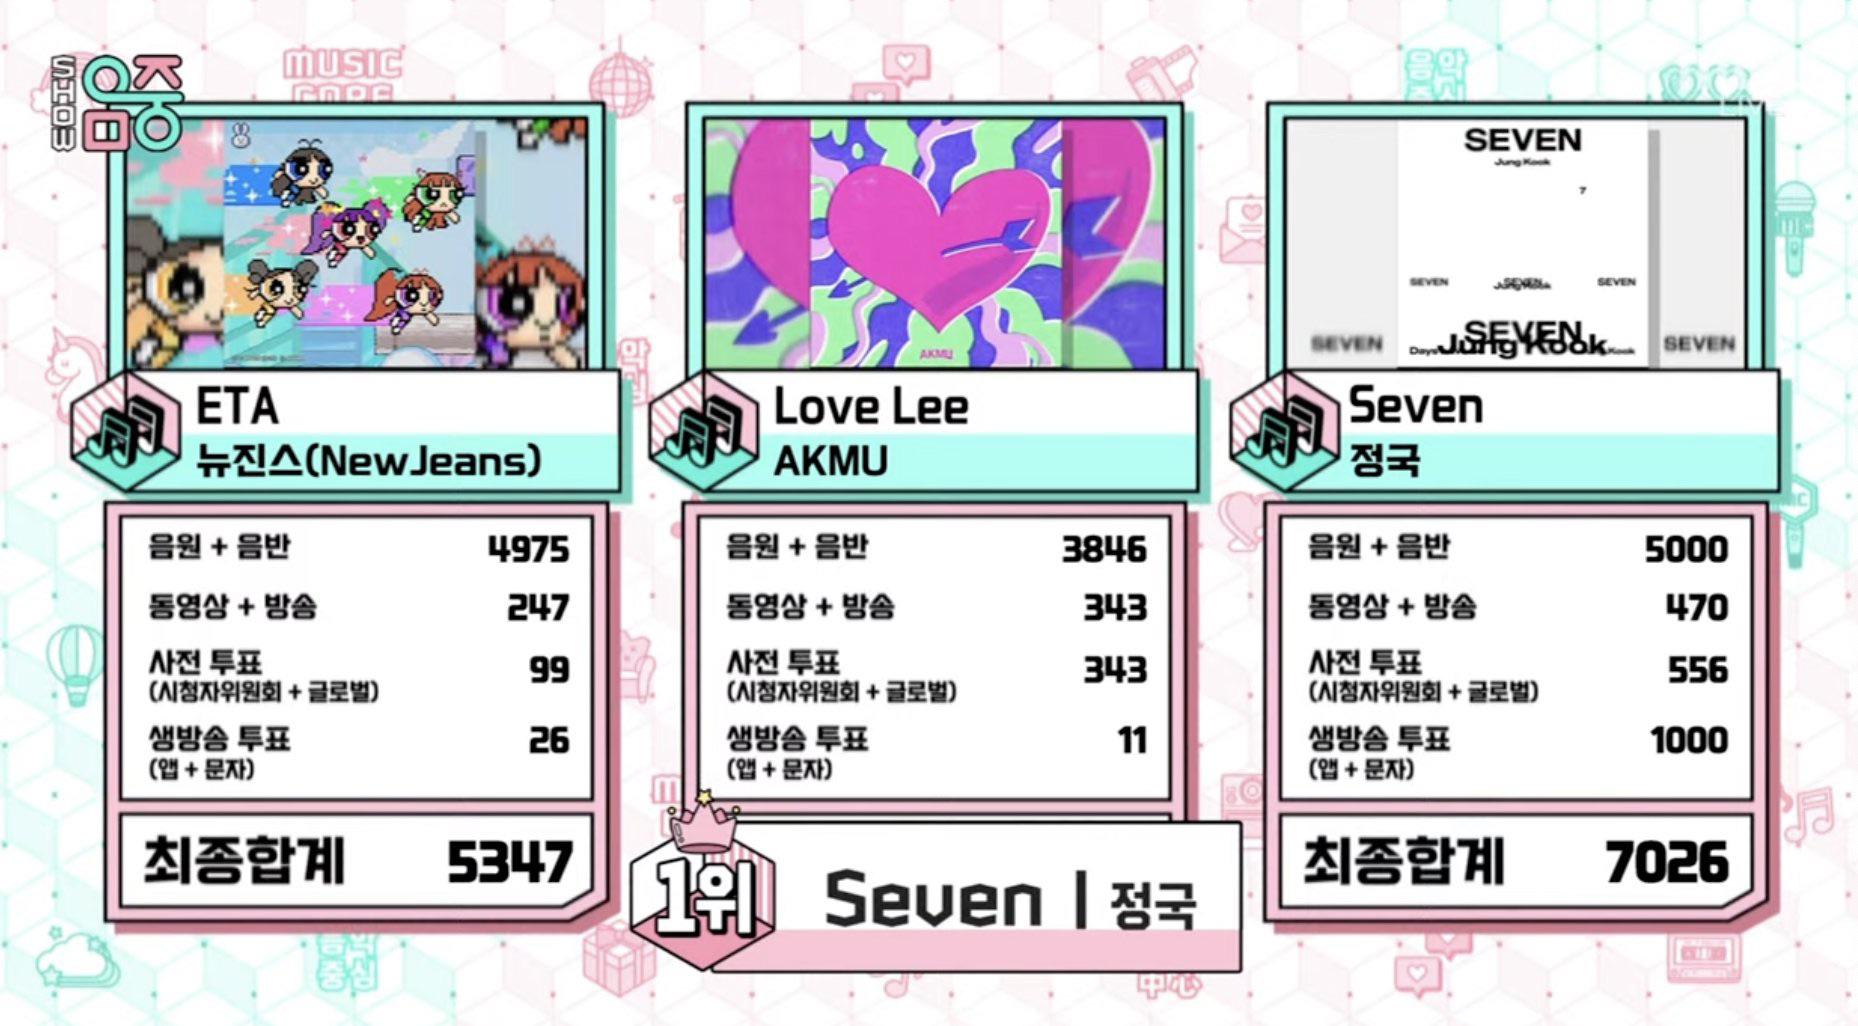 230909 Jungkook has taken his 12th win for “Seven (feat. Latto)” on this week’s Music Core